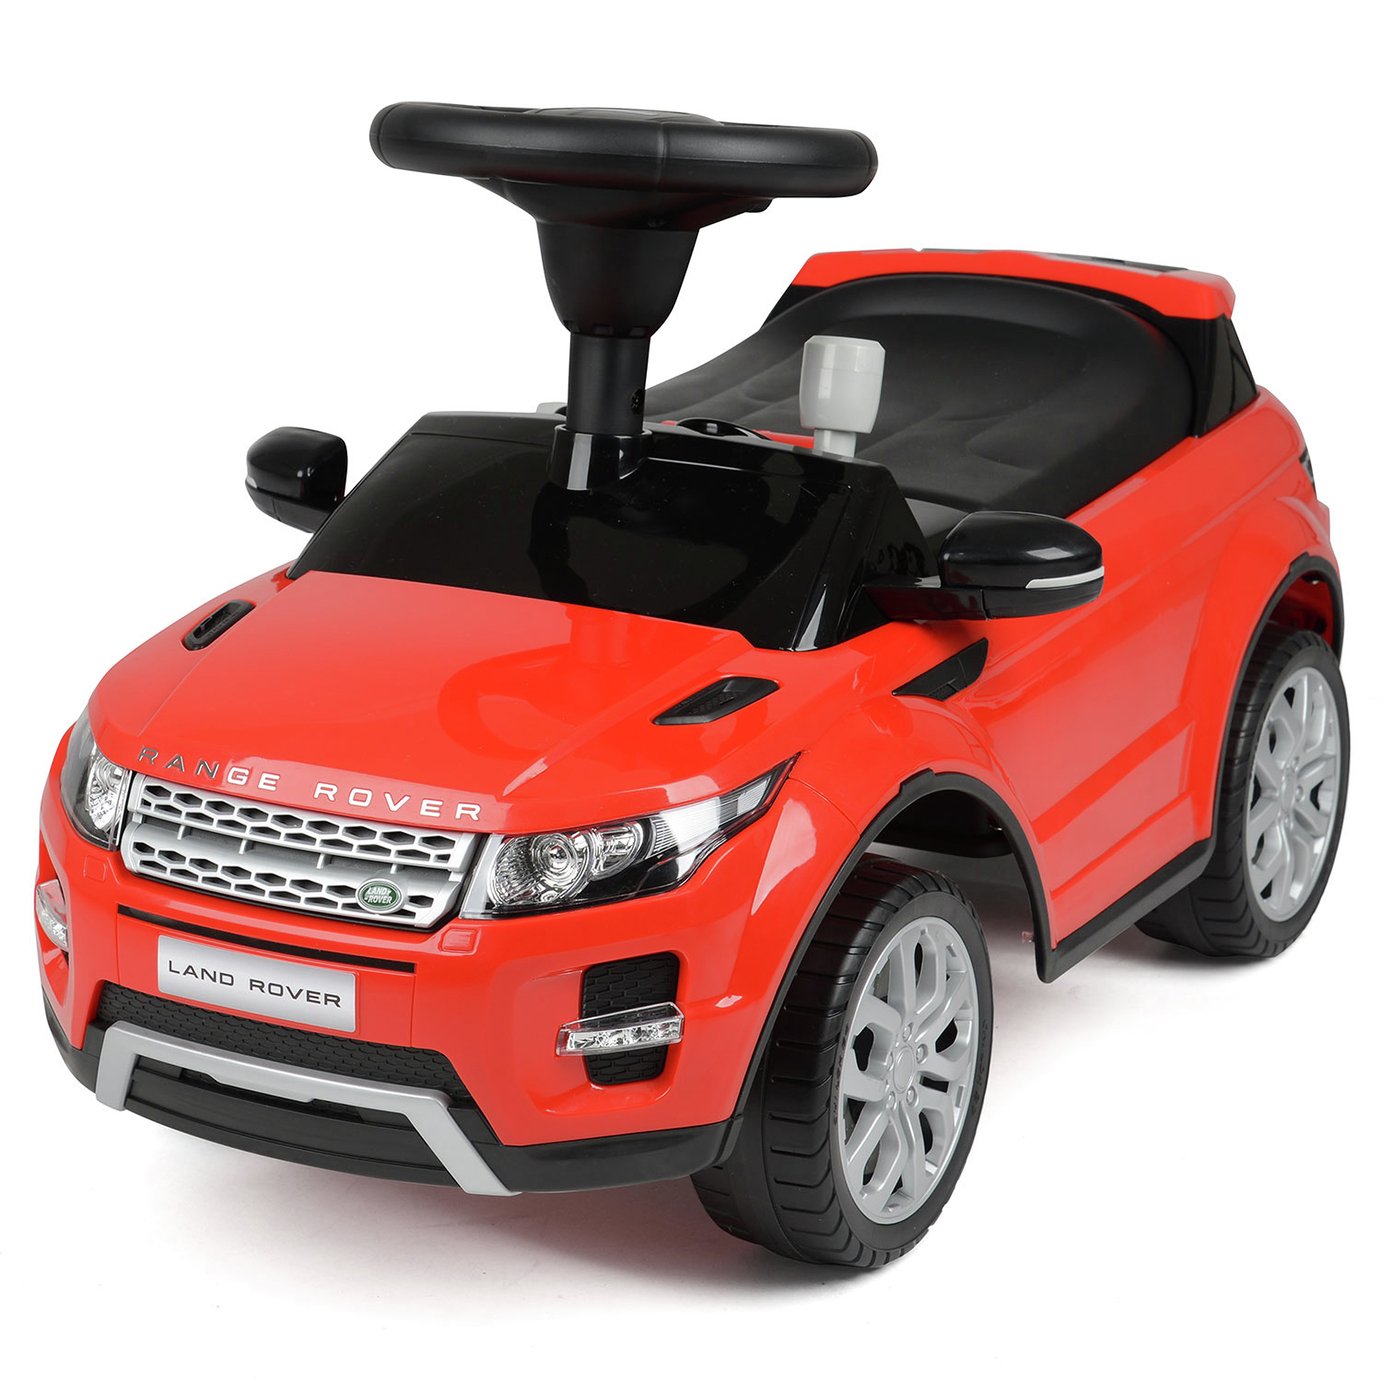 sit and go range rover ride on car